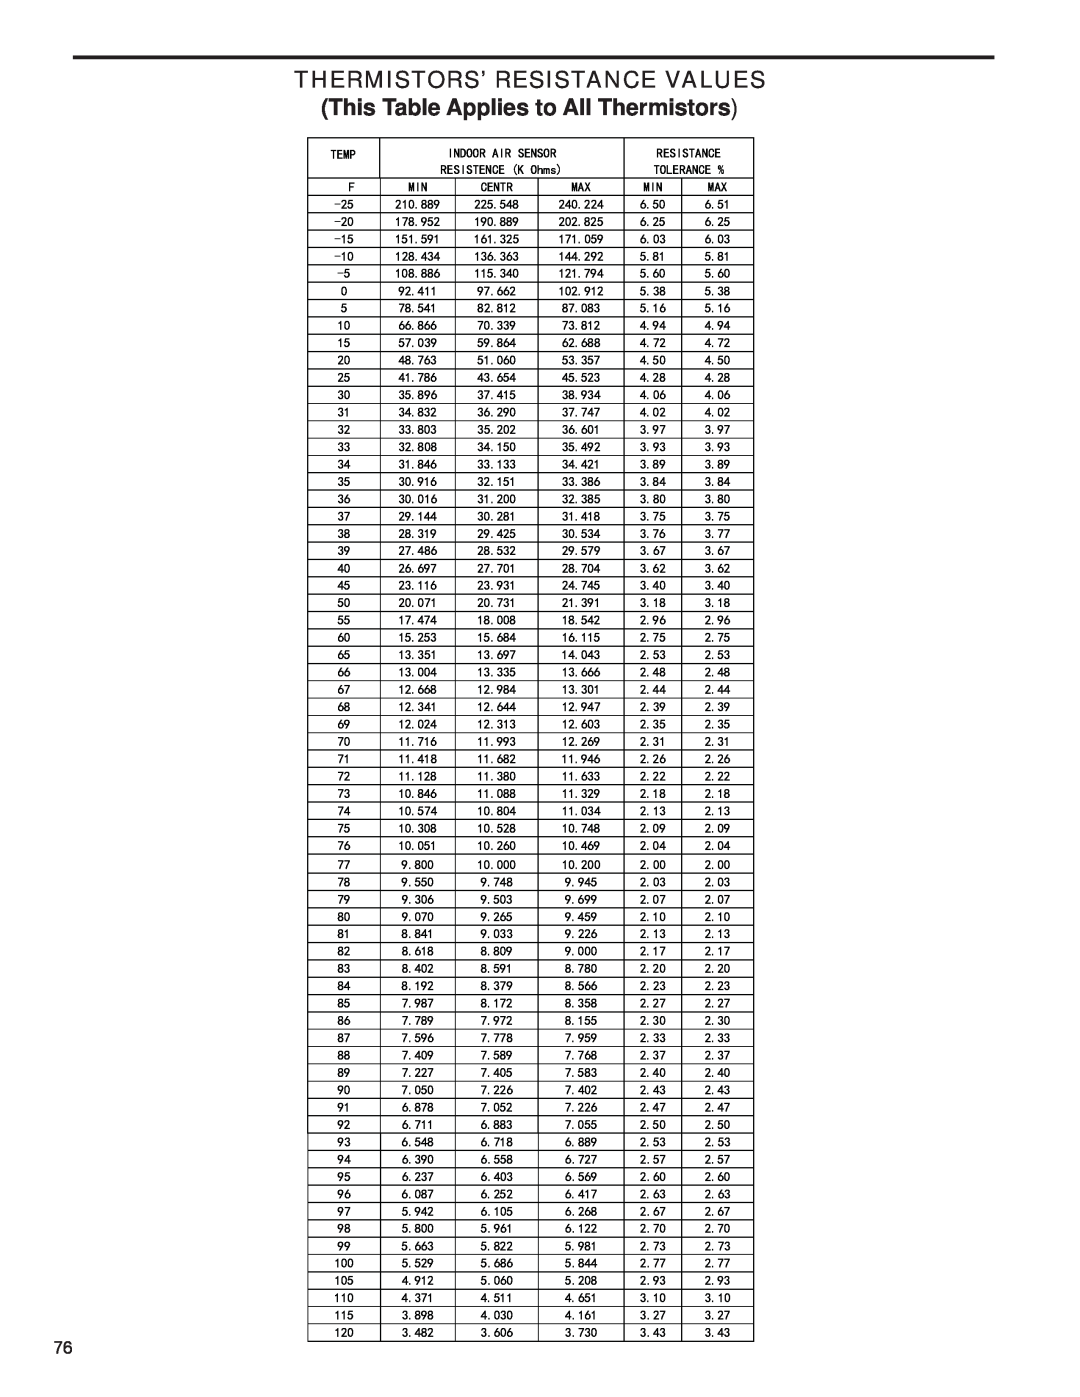 Friedrich R-410A service manual Thermistors’ Resistance Values, This Table Applies to All Thermistors 